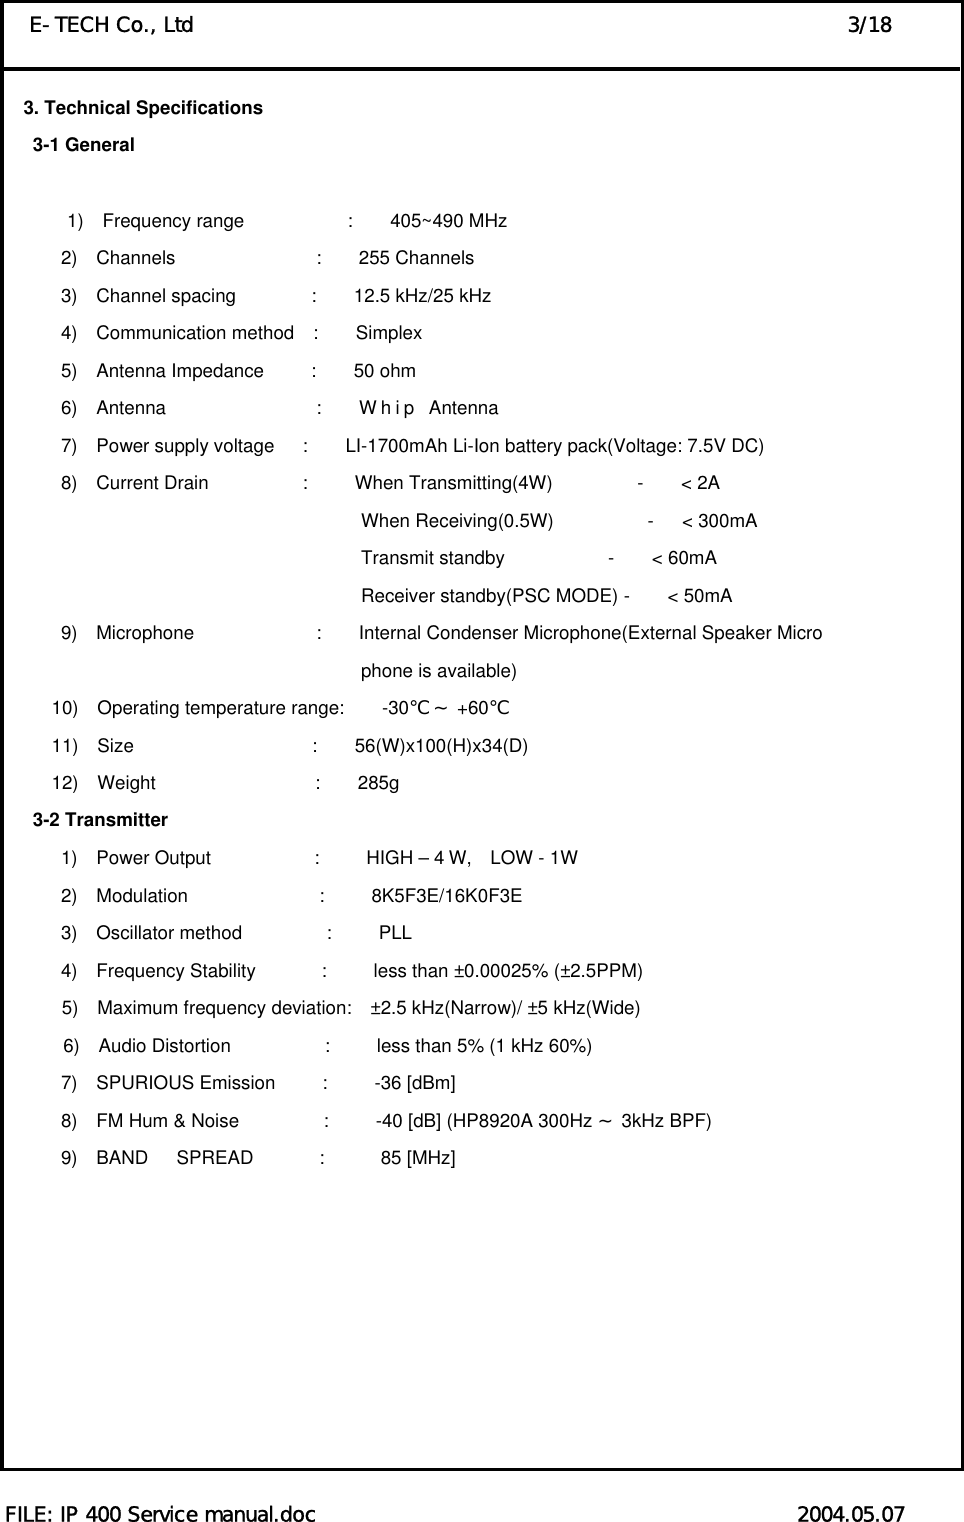  FILE: IP 400 Service manual.doc                                               2004.05.07 E-TECH Co., Ltd                                                                3/18 3. Technical Specifications    3-1 General          1)  Frequency range           :    405~490 MHz 2)  Channels               :    255 Channels 3)  Channel spacing        :    12.5 kHz/25 kHz 4)  Communication method  :    Simplex 5)  Antenna Impedance     :    50 ohm  6)  Antenna                :    Whip  Antenna 7)  Power supply voltage   :    LI-1700mAh Li-Ion battery pack(Voltage: 7.5V DC) 8)  Current Drain          :     When Transmitting(4W)         -    &lt; 2A                                       When Receiving(0.5W)          -   &lt; 300mA                                       Transmit standby           -    &lt; 60mA                                       Receiver standby(PSC MODE) -    &lt; 50mA 9)  Microphone             :    Internal Condenser Microphone(External Speaker Micro                                 phone is available)       10)  Operating temperature range:    -30    +℃～ 60℃      11)  Size                   :    56(W)x100(H)x34(D)      12)  Weight                 :    285g    3-2 Transmitter       1)  Power Output           :     HIGH – 4W,  LOW - 1W       2)  Modulation              :     8K5F3E/16K0F3E       3)  Oscillator method         :     PLL       4)  Frequency Stability       :     less than ±0.00025% (±2.5PPM) 5)  Maximum frequency deviation:  ±2.5 kHz(Narrow)/ ±5 kHz(Wide) 6)  Audio Distortion          :     less than 5% (1 kHz 60%)       7)  SPURIOUS Emission     :     -36 [dBm]       8)  FM Hum &amp; Noise         :     -40 [dB] (HP8920A 300Hz   3kHz BP～F)        9)  BAND   SPREAD       :      85 [MHz]         